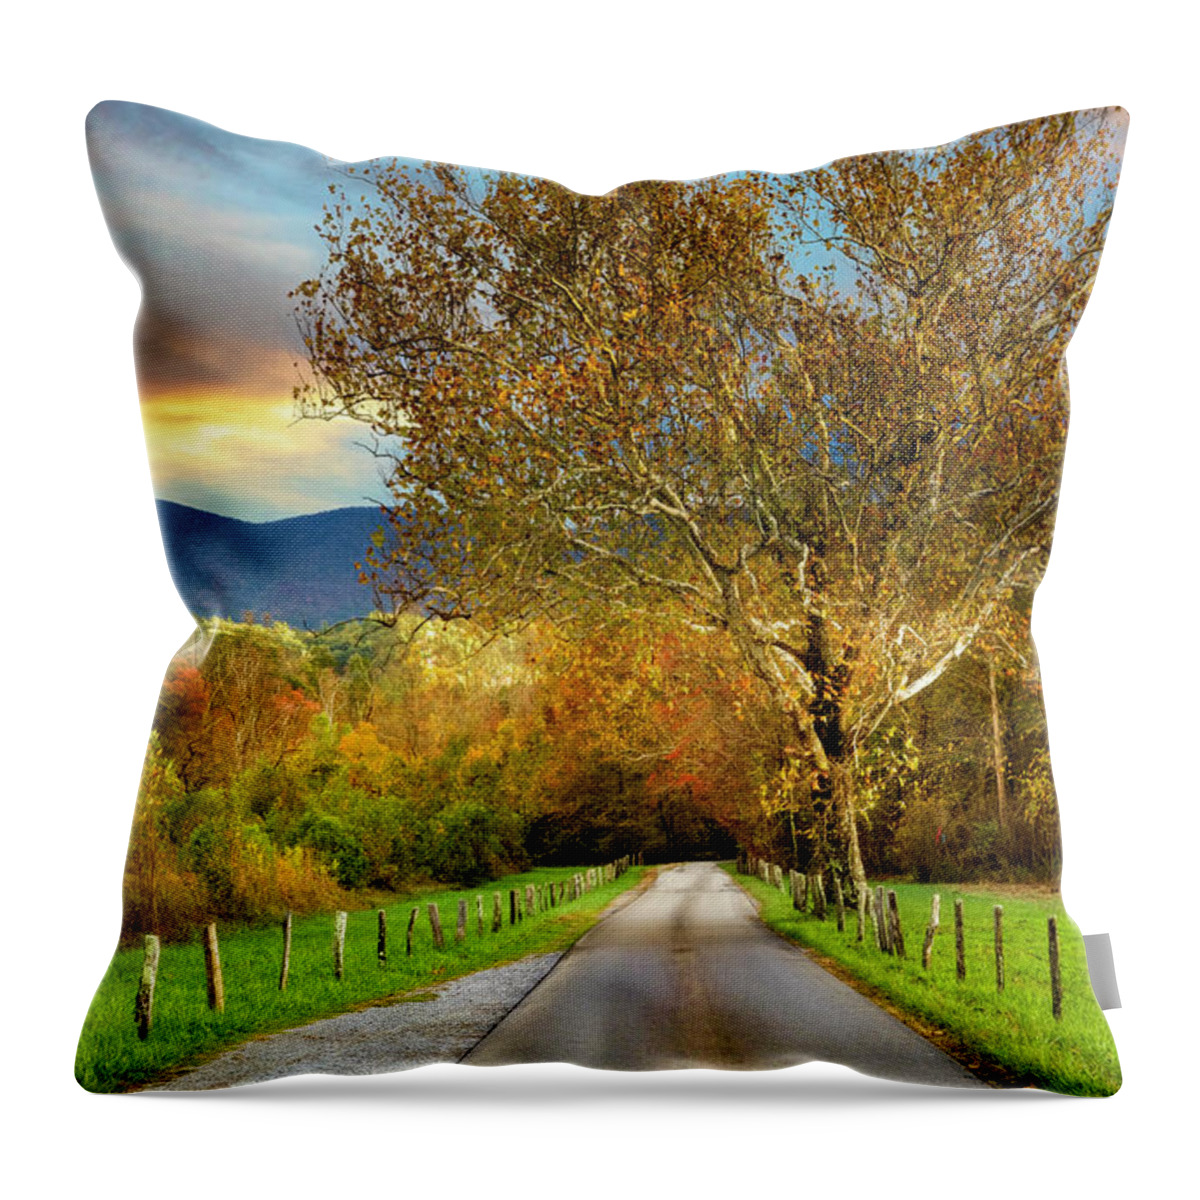 Trail Throw Pillow featuring the photograph Fence Along Sparks Lane at Cades Cove by Debra and Dave Vanderlaan